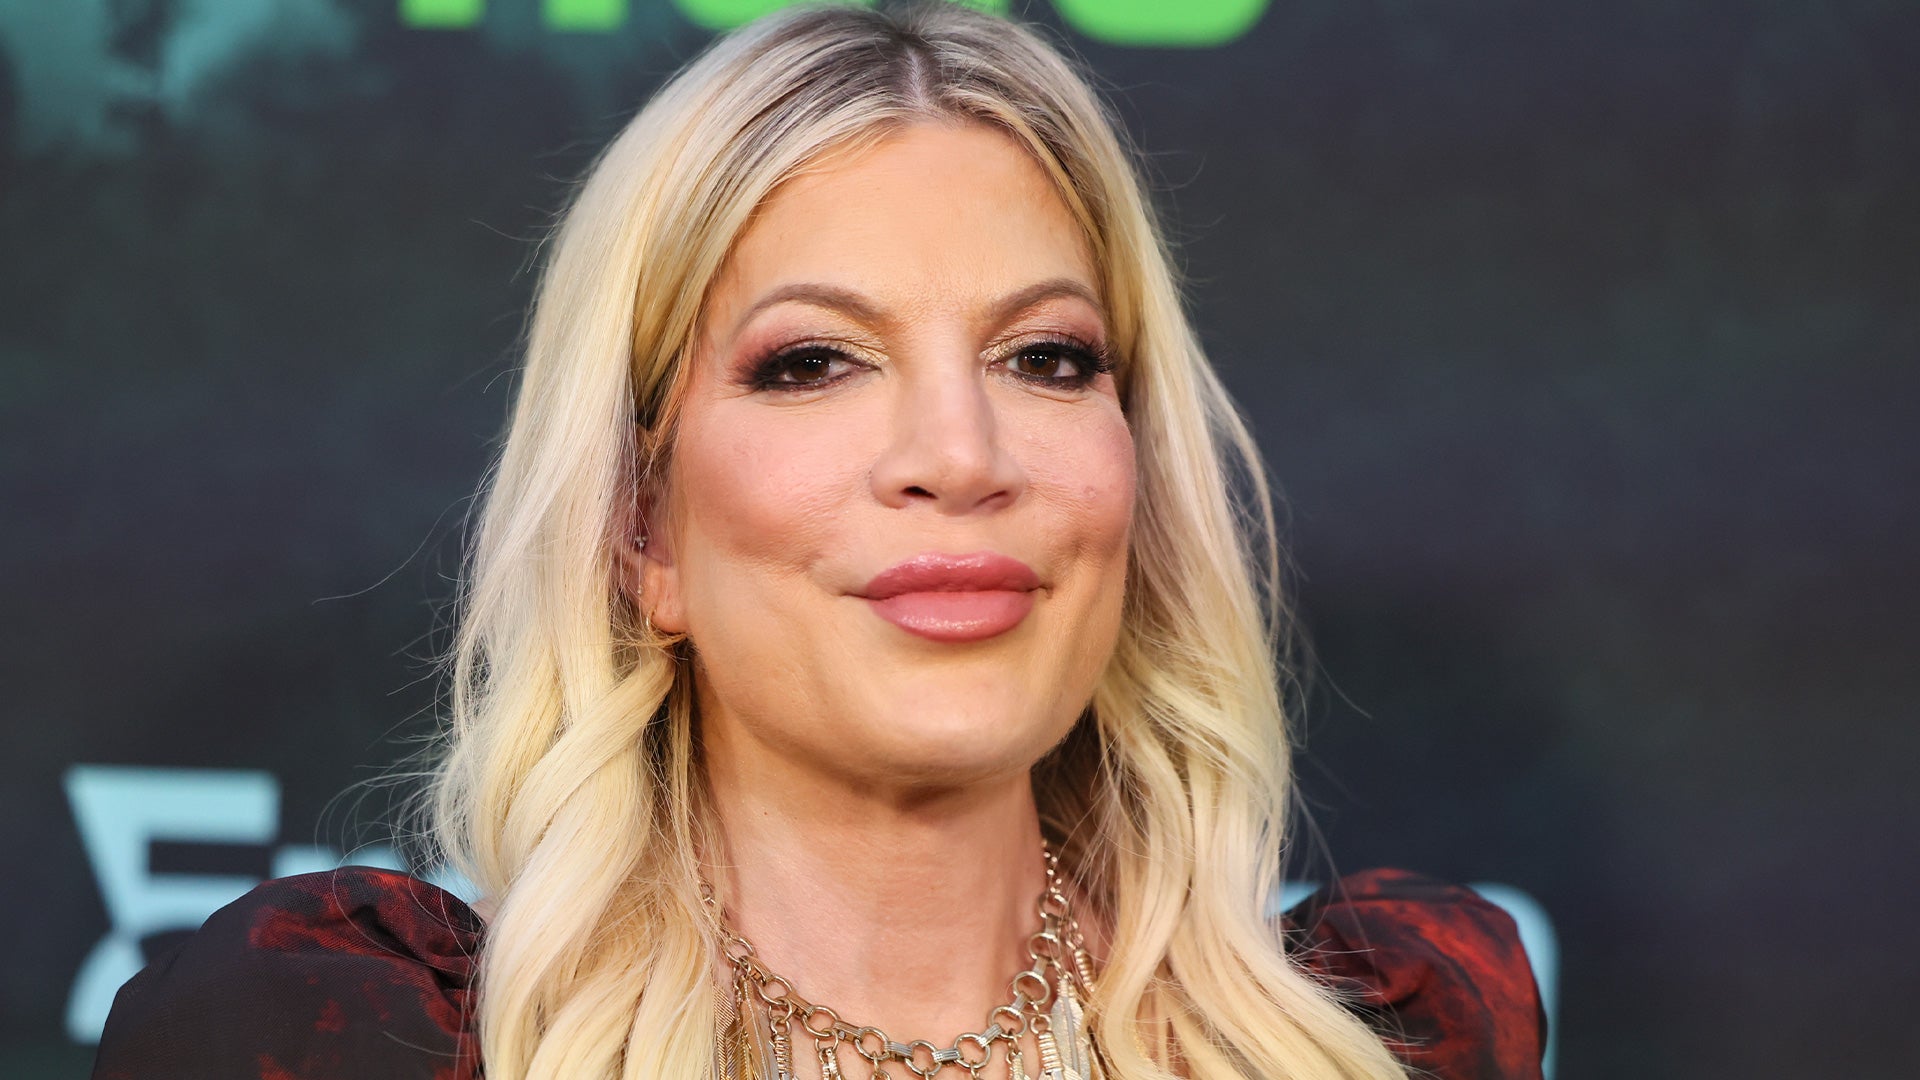 Tori Spelling Slams 'Totally False' Stories About Her Housing With Her Landlord